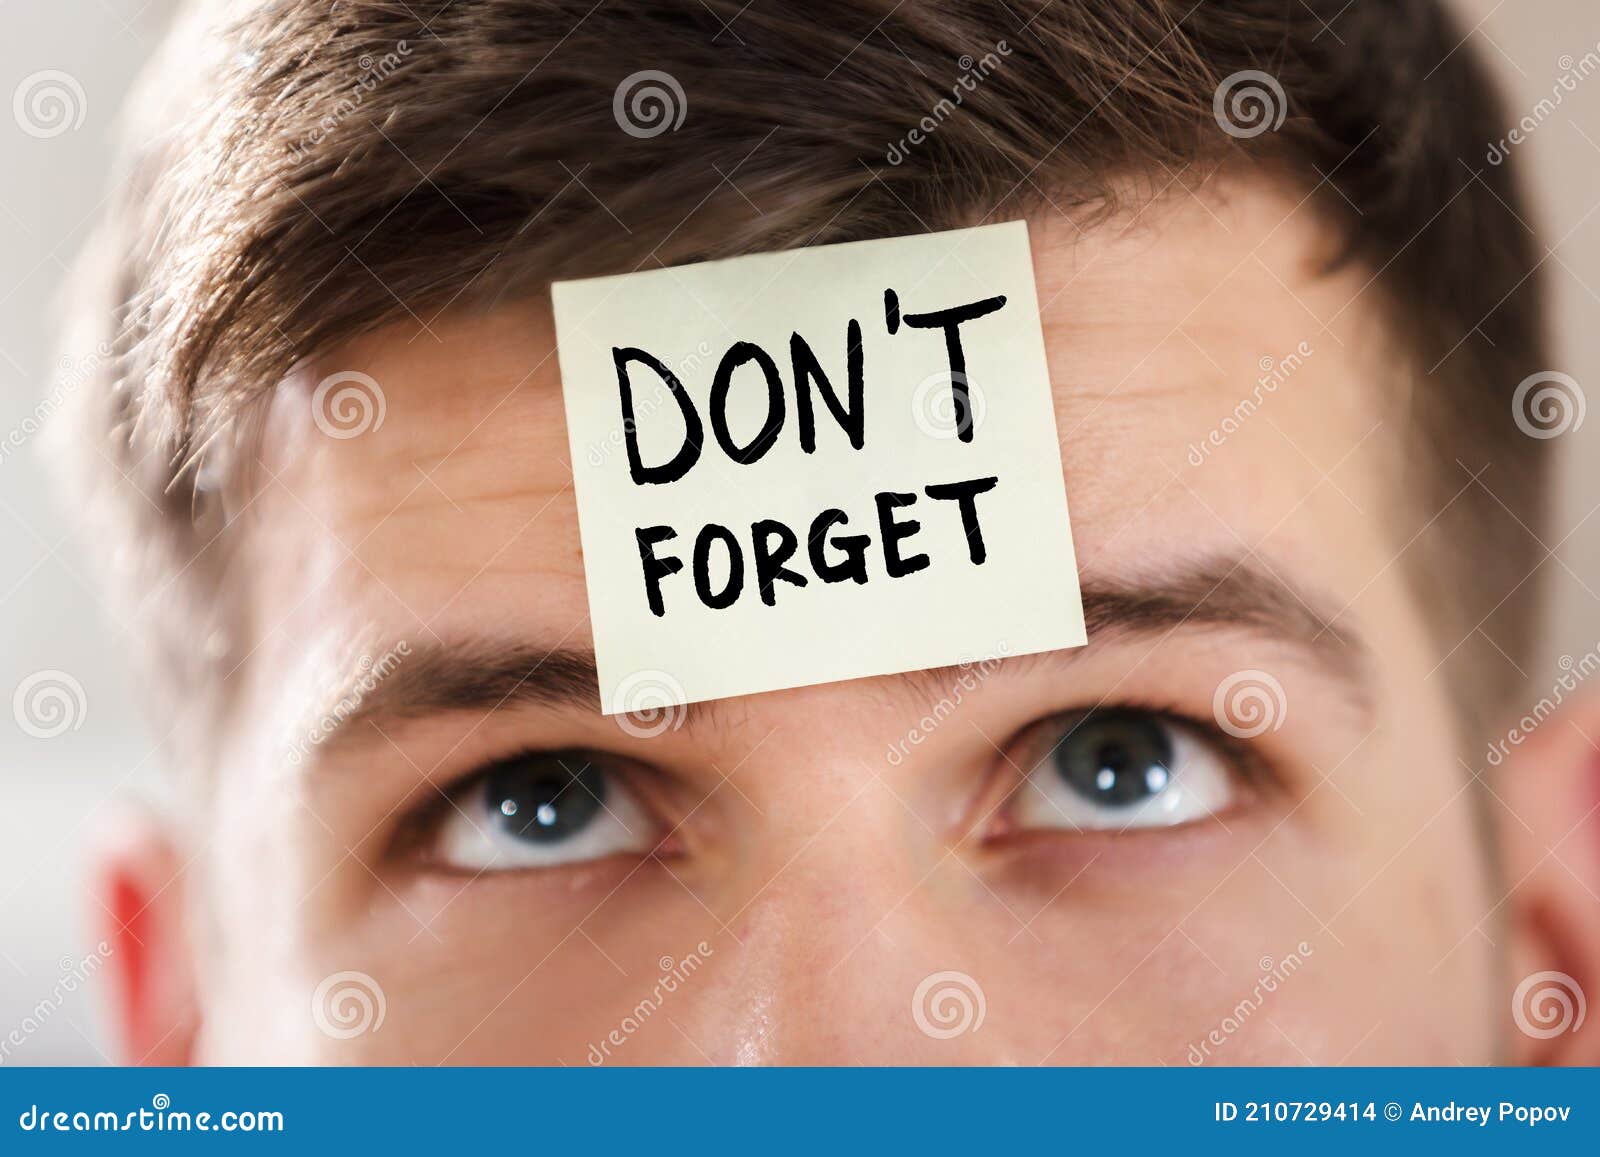 sticky note with don`t forget text stuck on man`s forehead